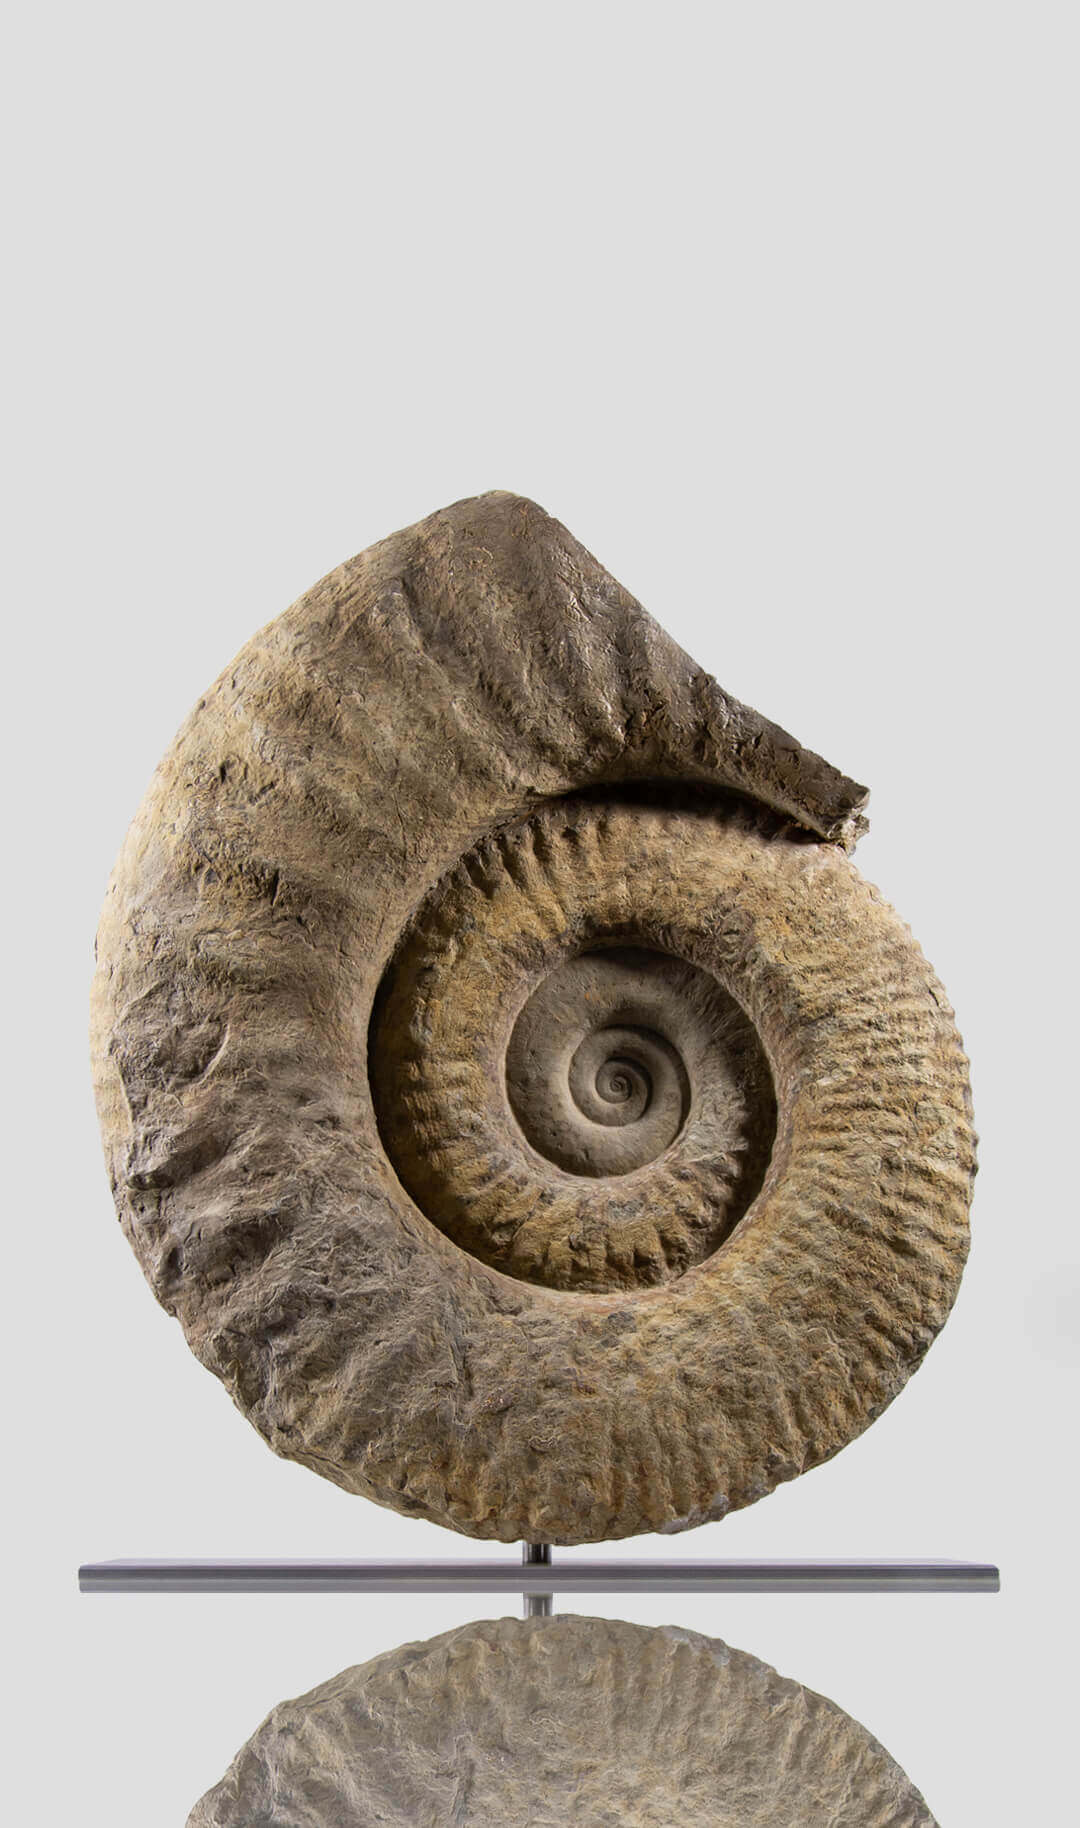 mantelliceras ammonite for sale on stainless steel swivel stand 05